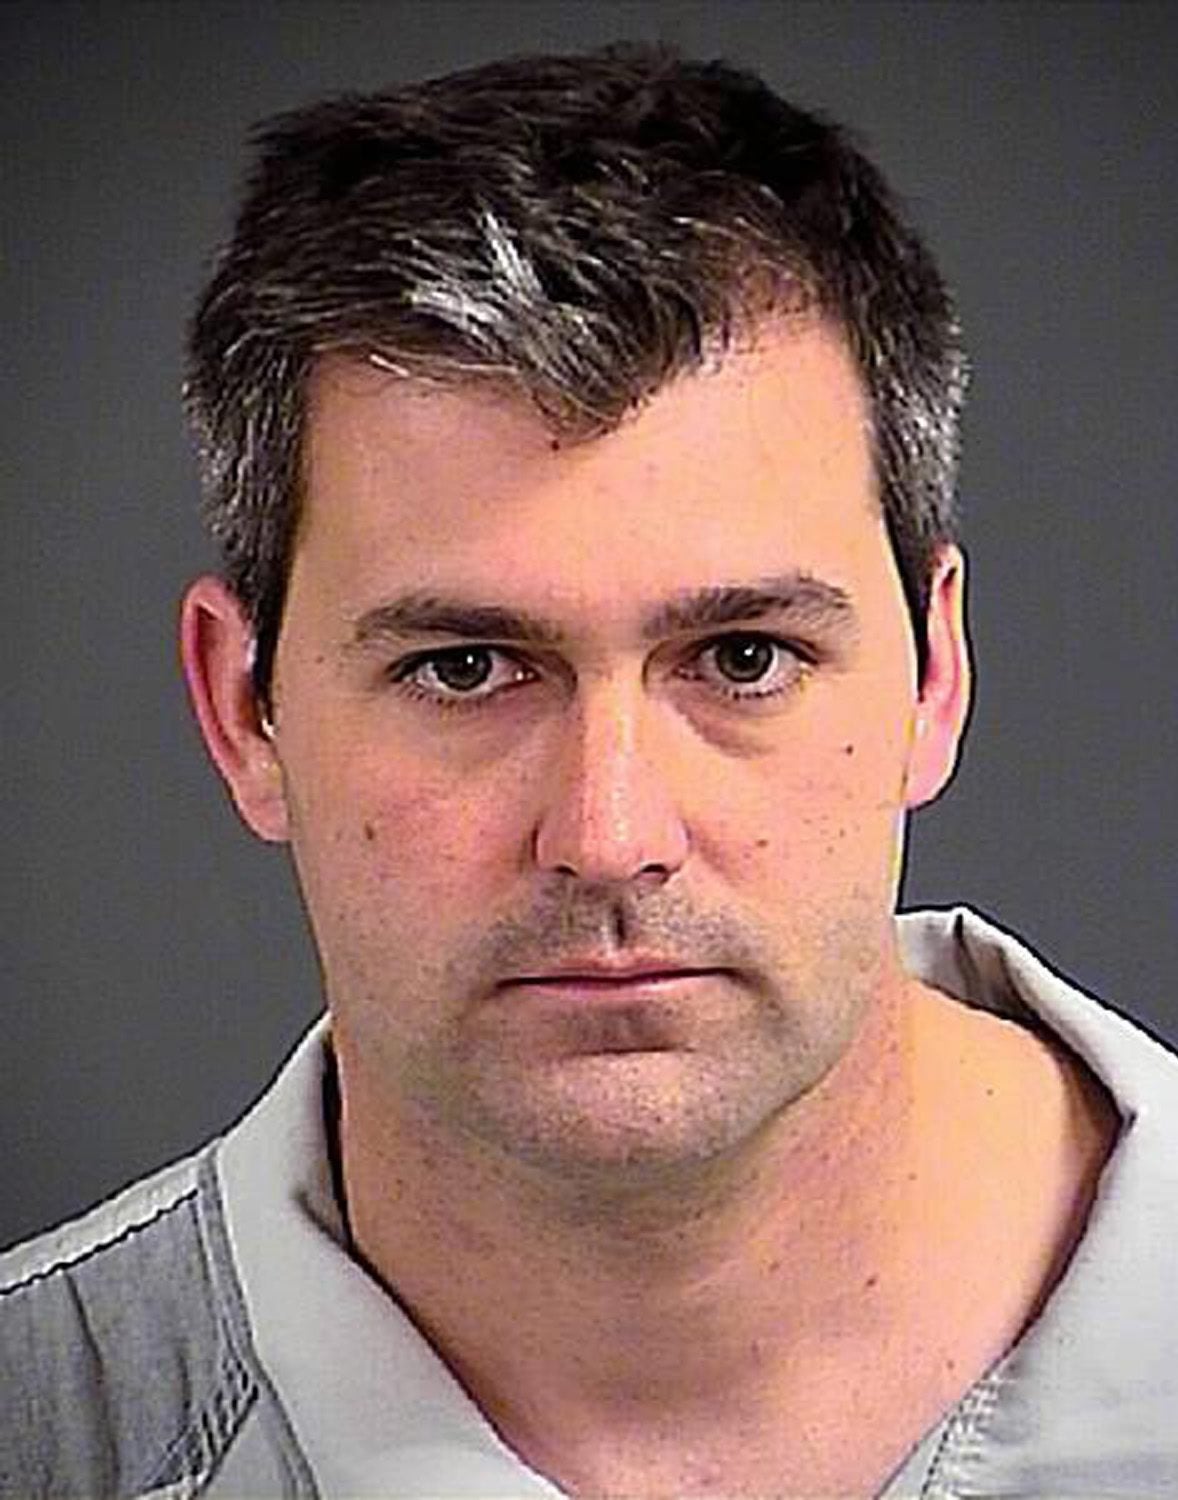 Officer Michael Slager has been charged with murder over the incident